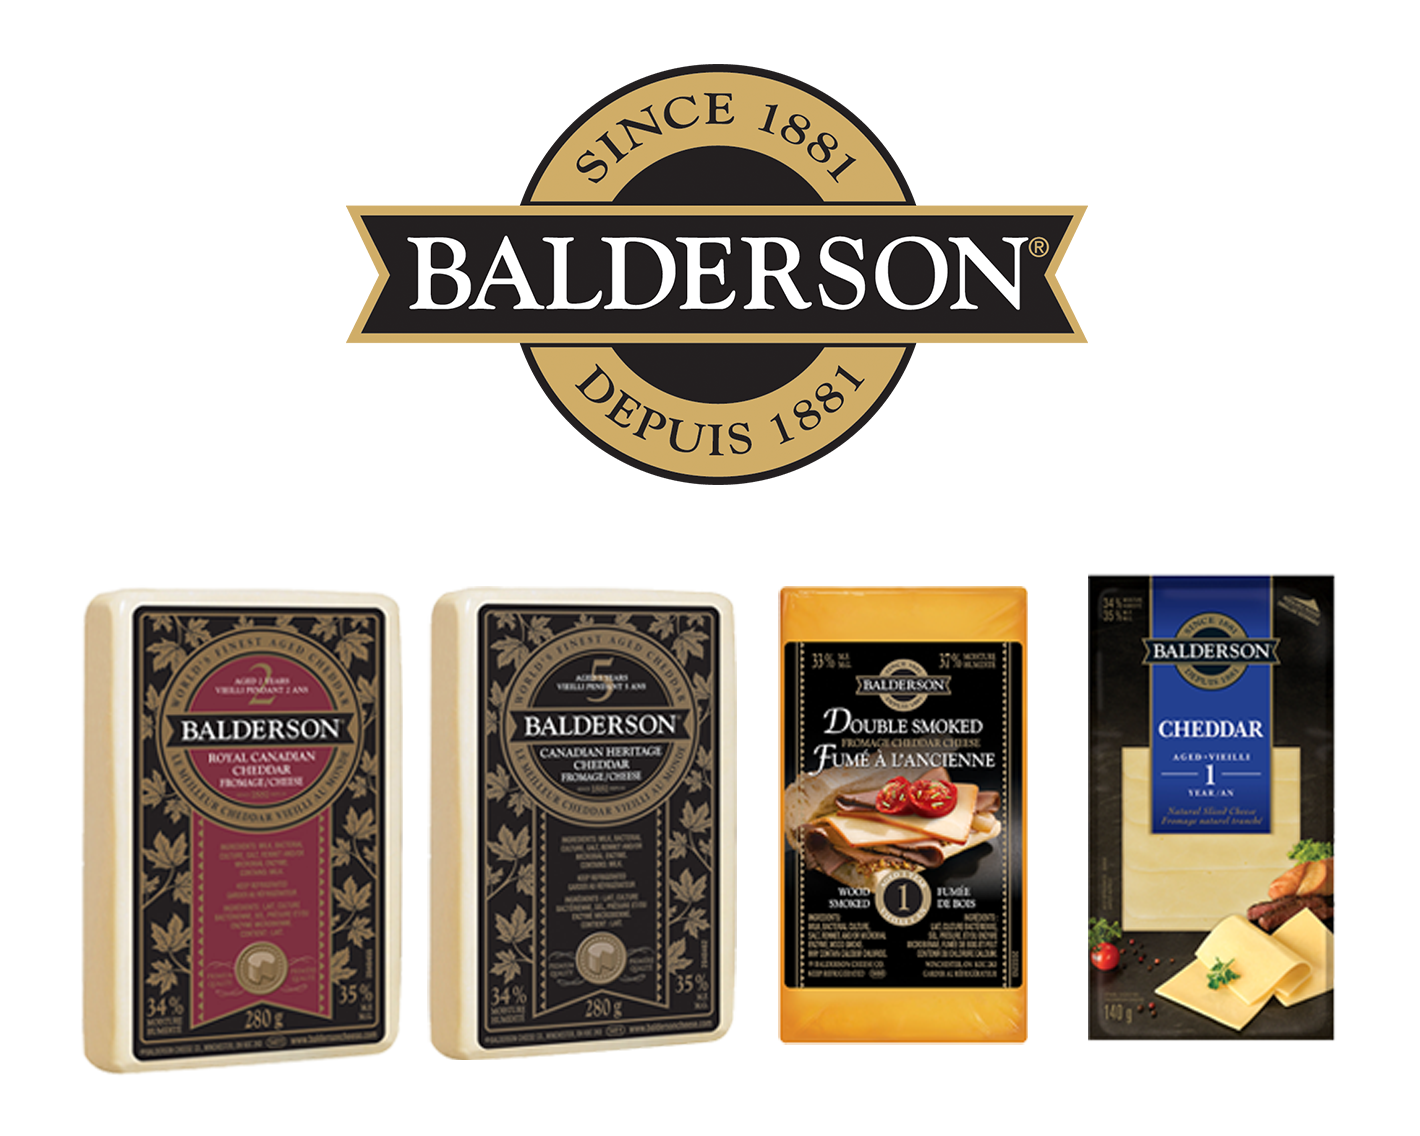 Five bricks of Balderson Cheese are lined up against a white background.